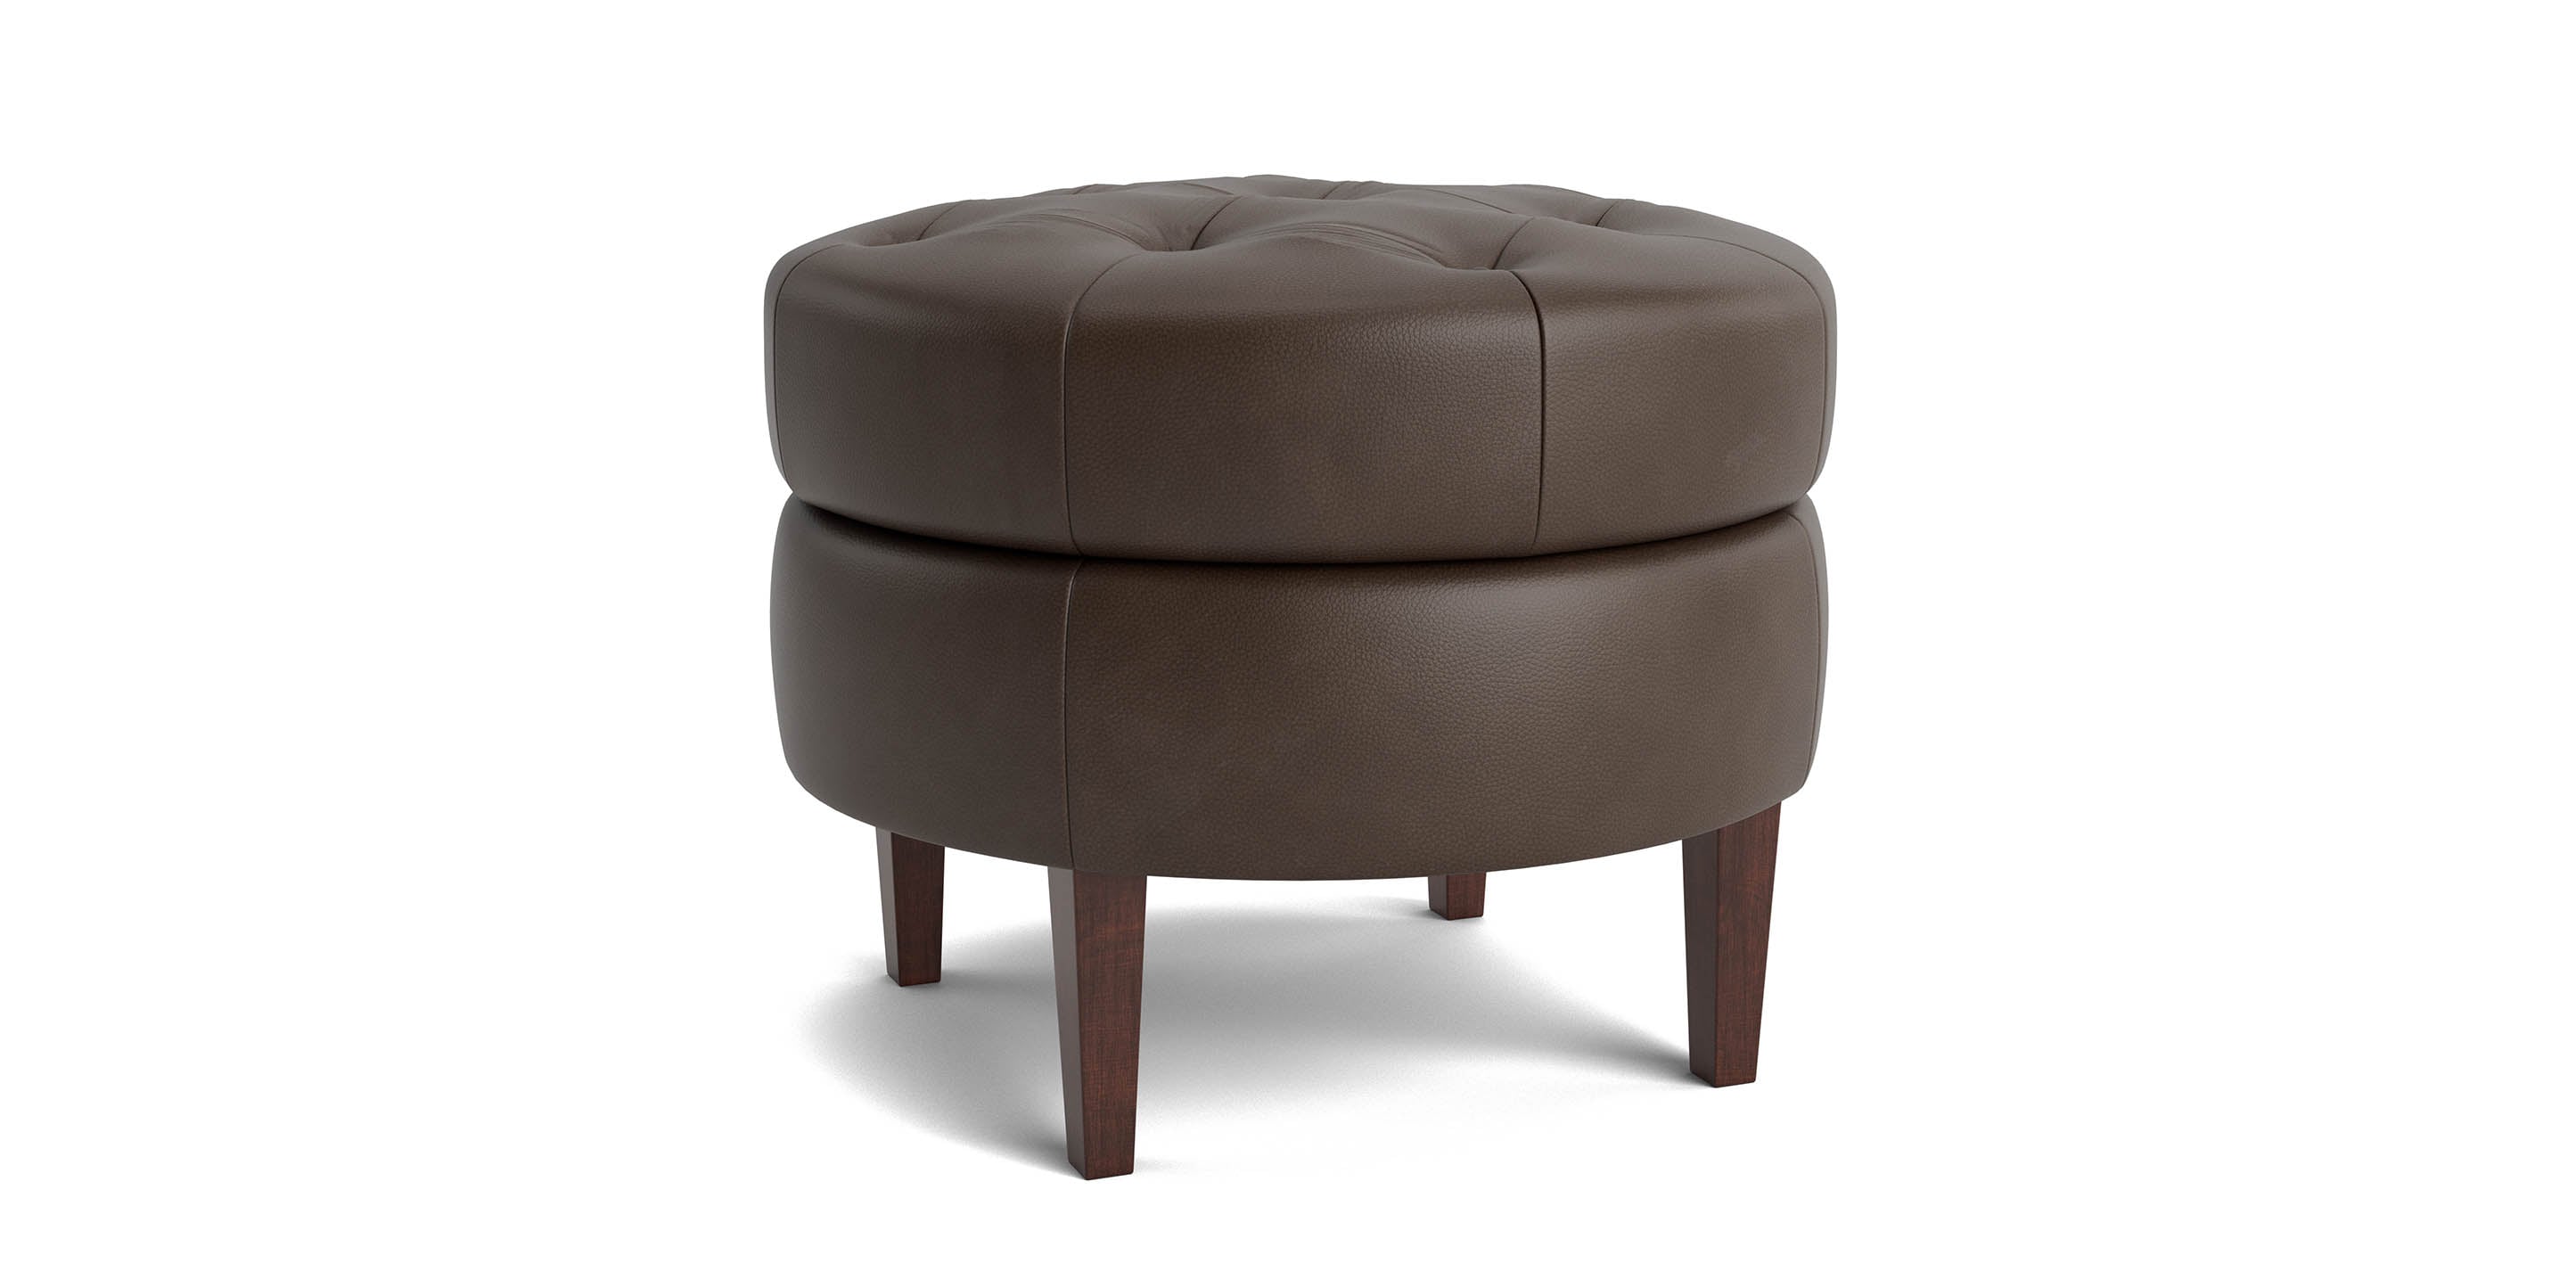 Delway Round Leather Ottoman